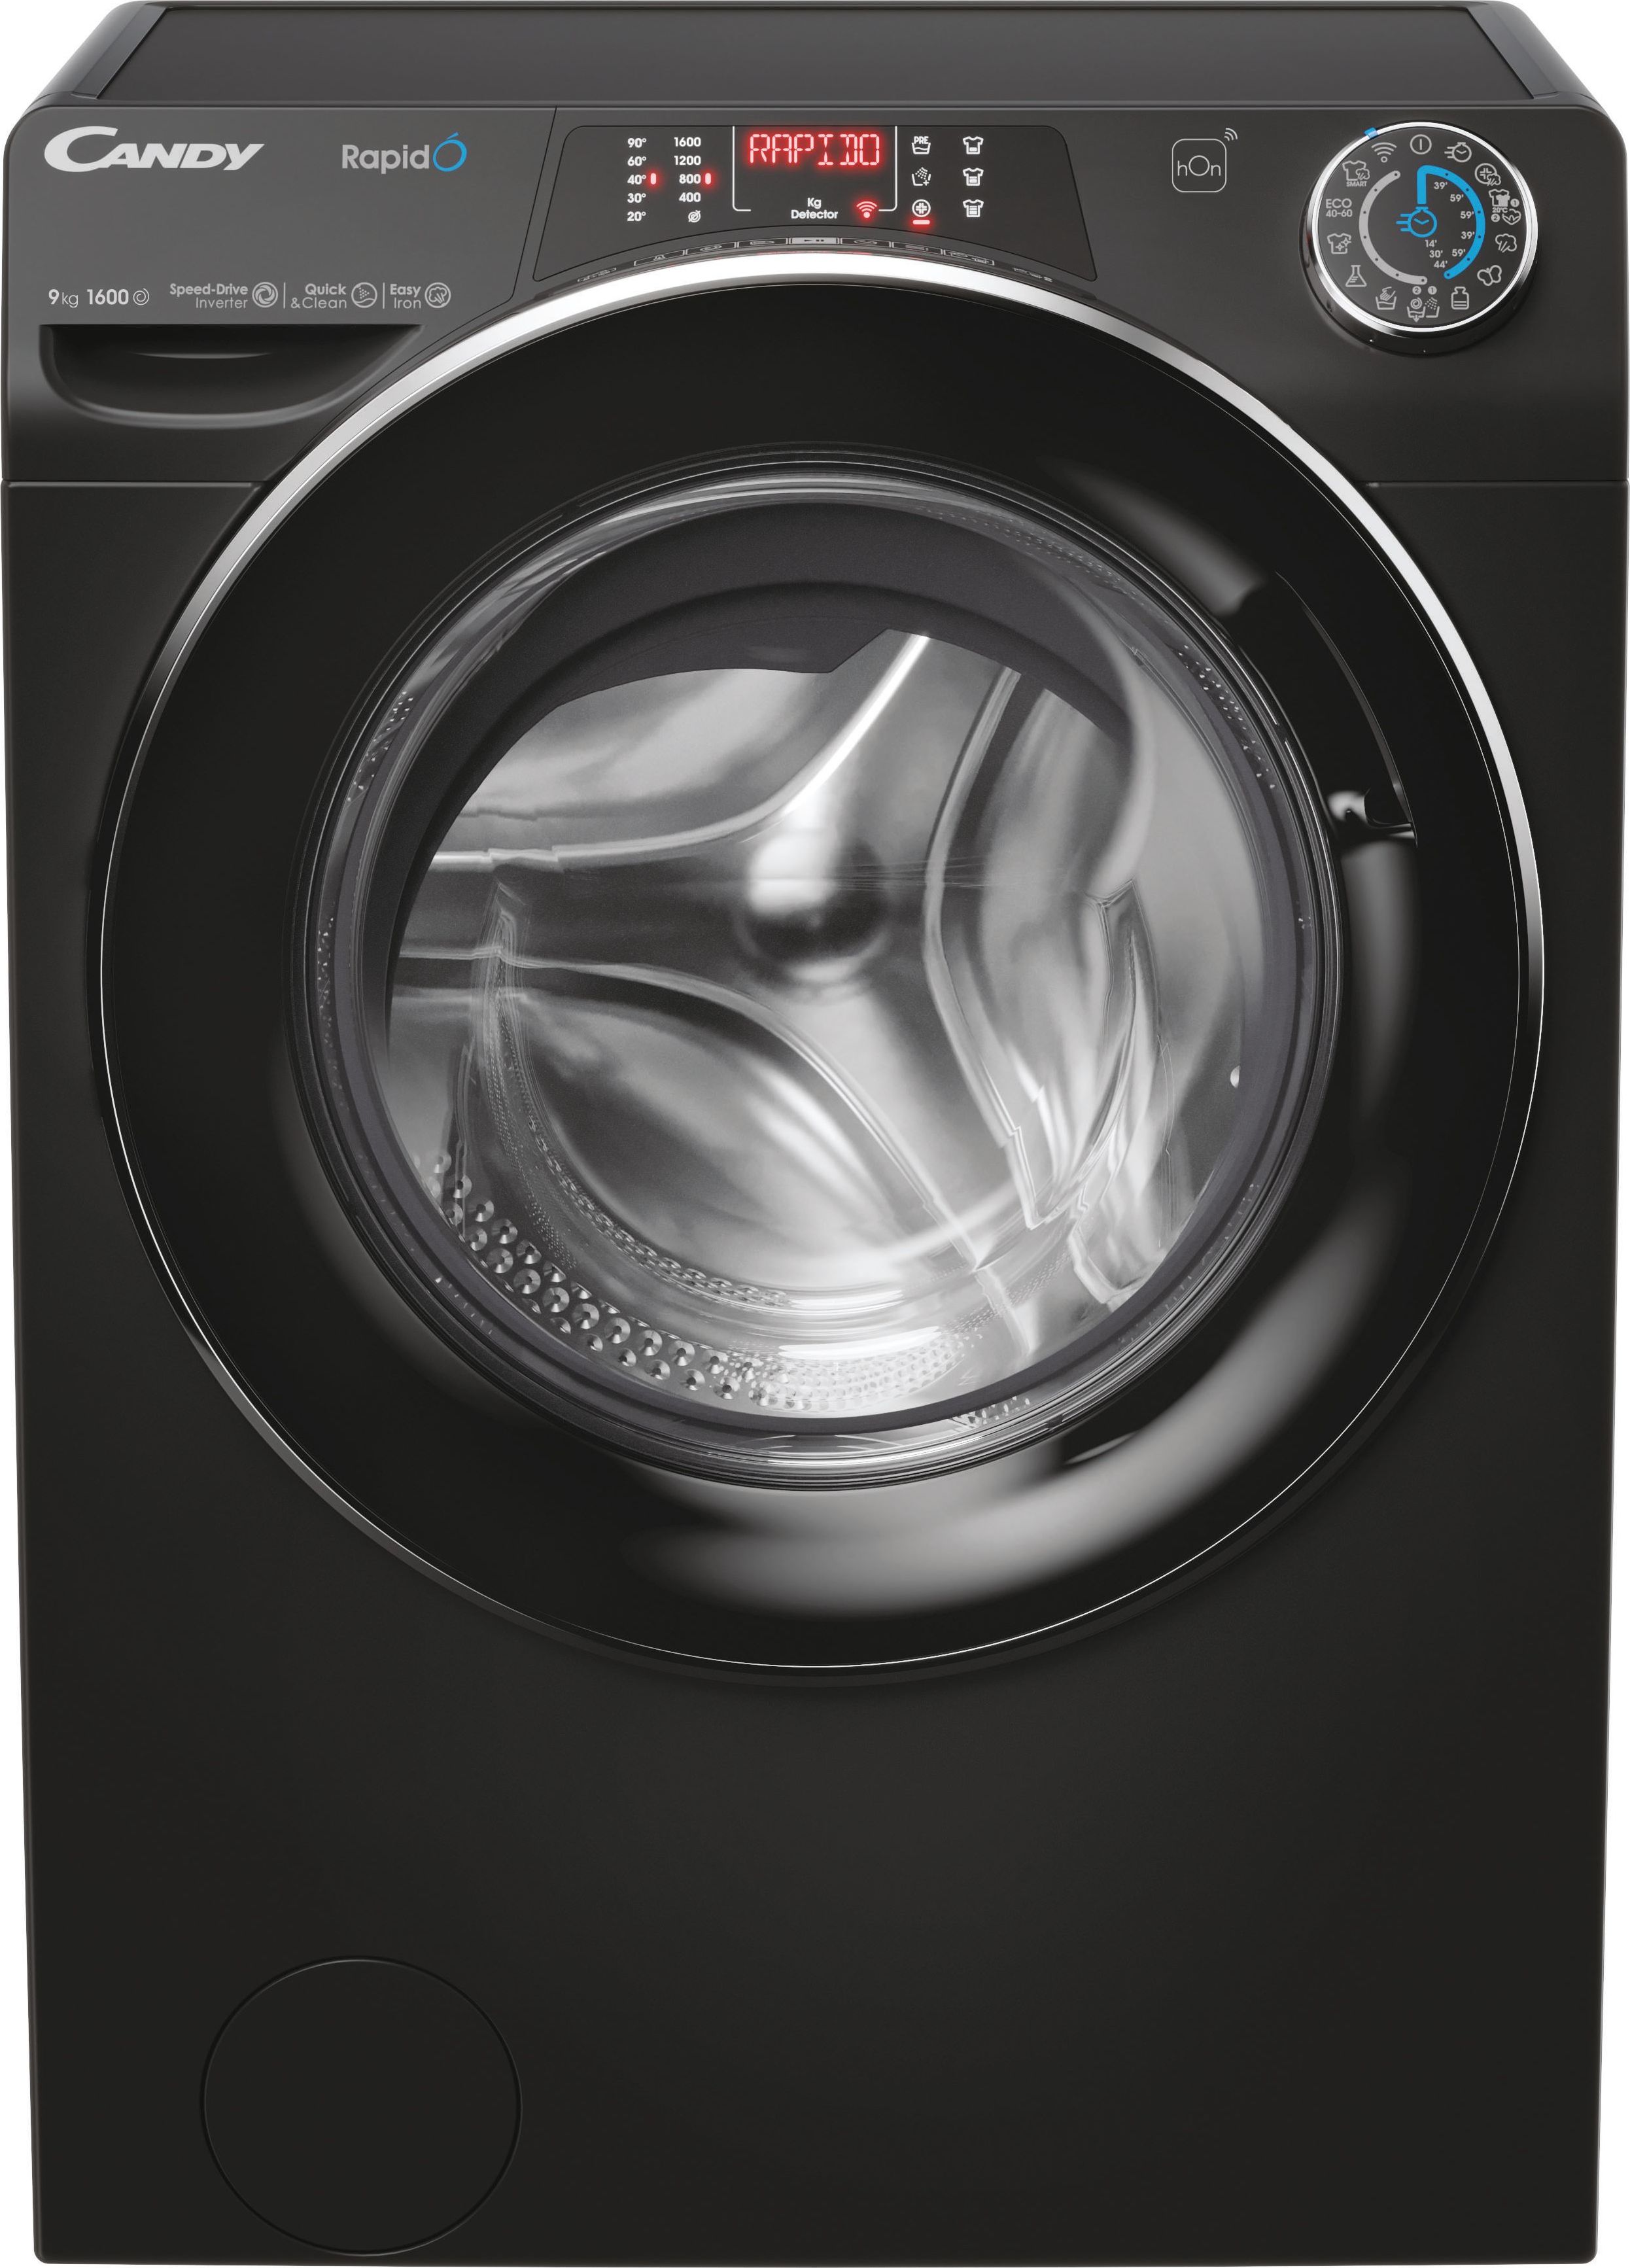 Candy Rapid RO1696DWMCB7-80 9kg Washing Machine with 1600 rpm - Black - A Rated Black